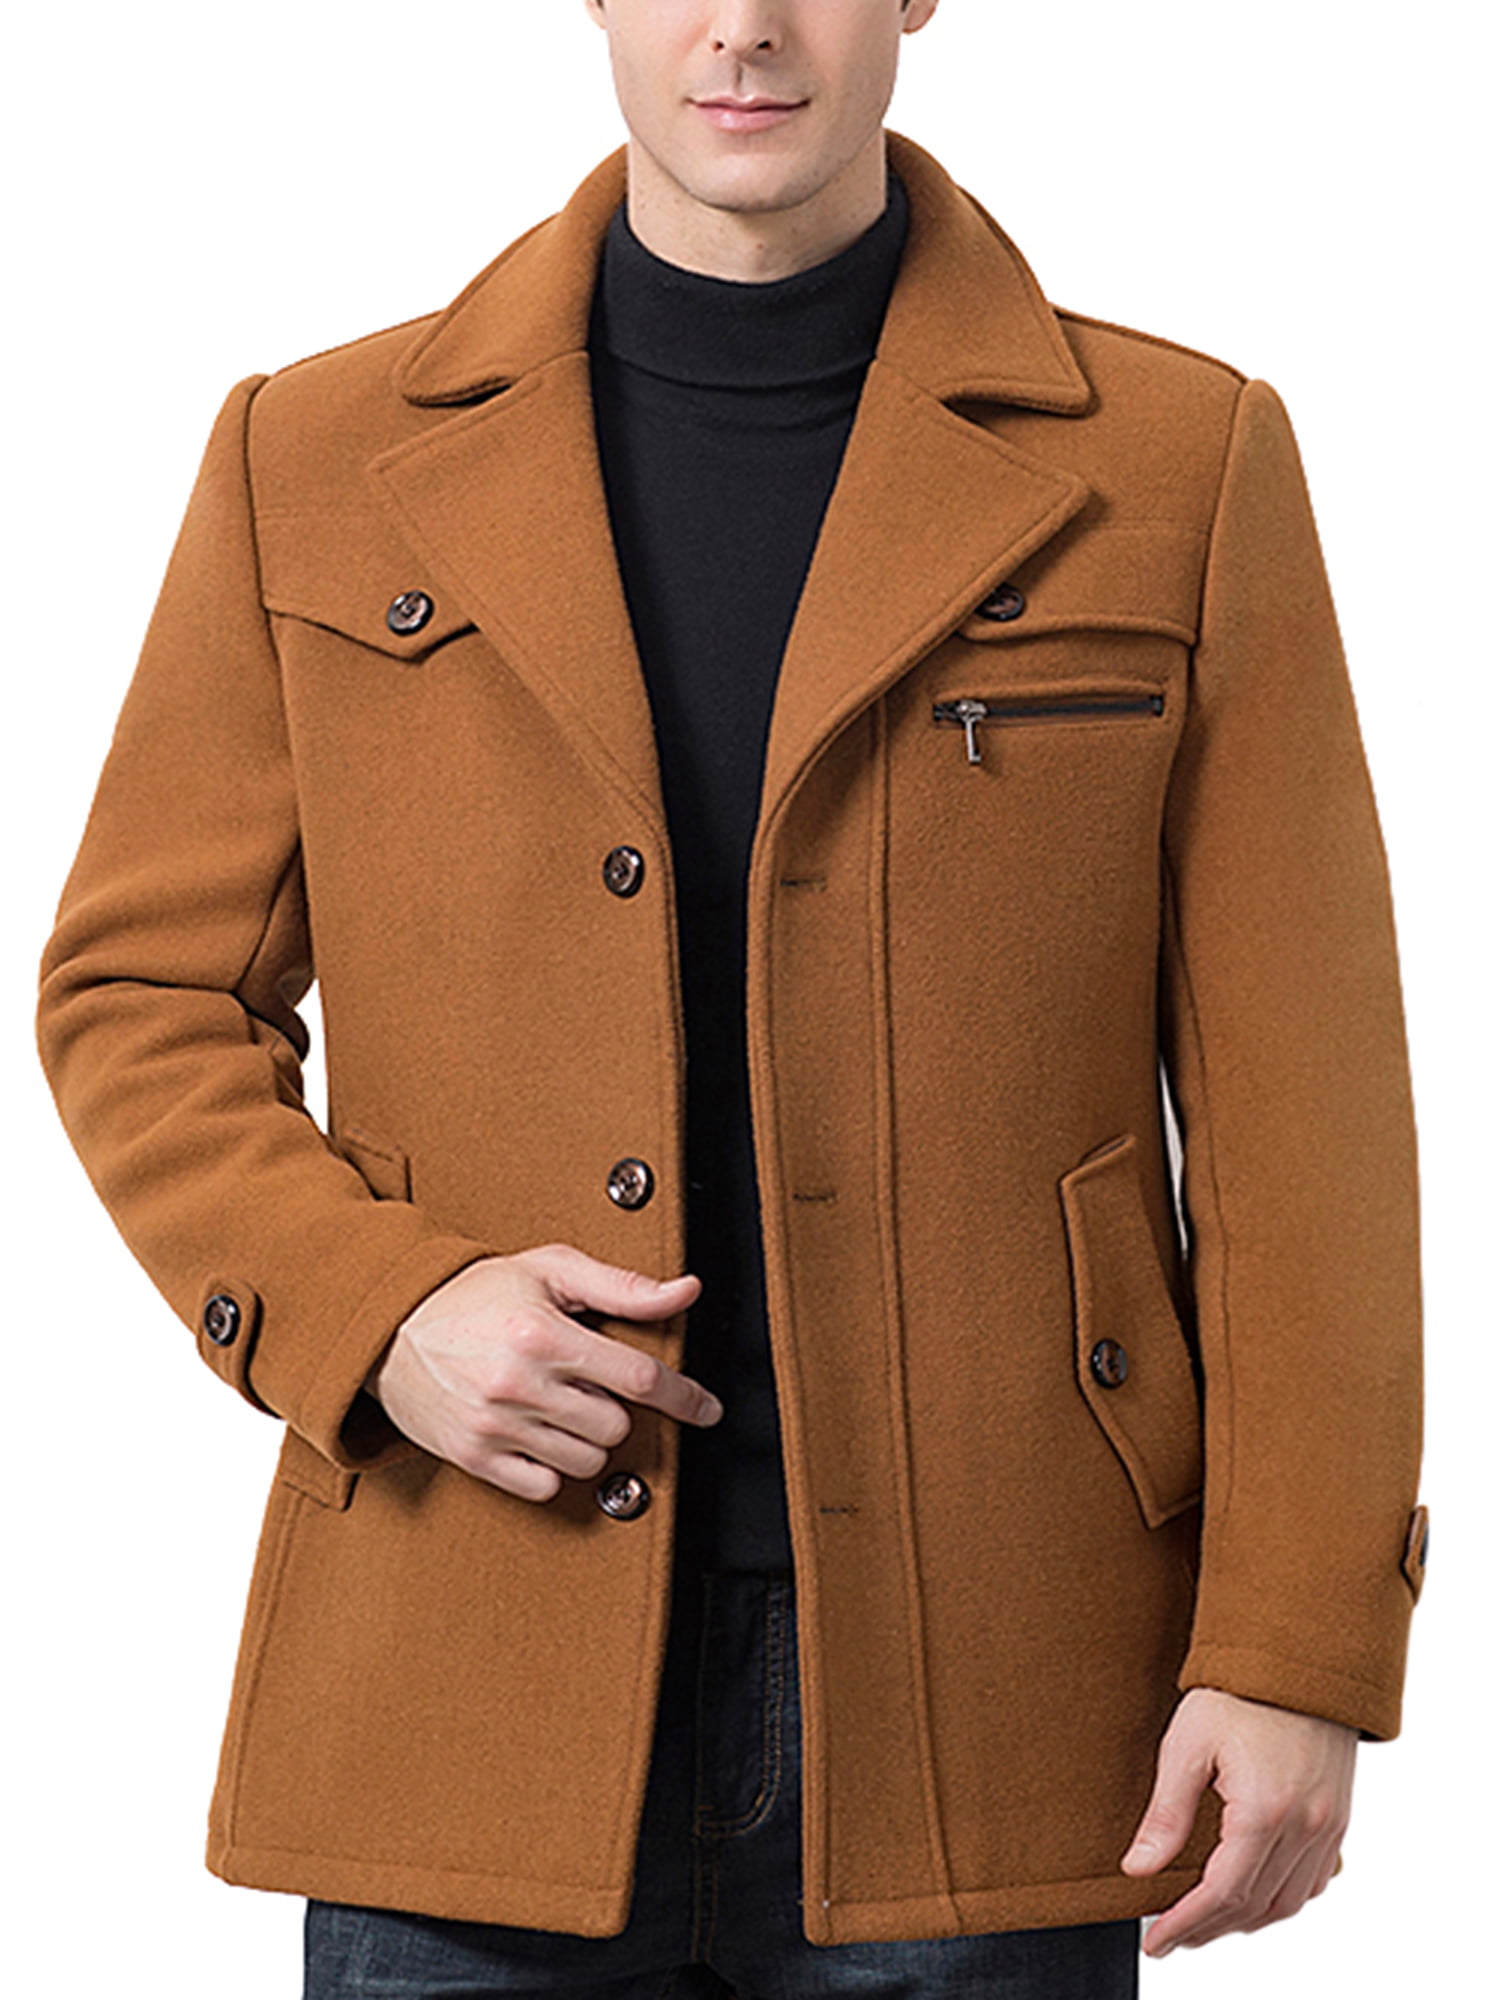 NHX Mens Wool Coat Long Business Casual Trench Coat Single Breasted Winter Overcoat Turn-Down Collar Woolen Coats Vintage Trench Jacket 